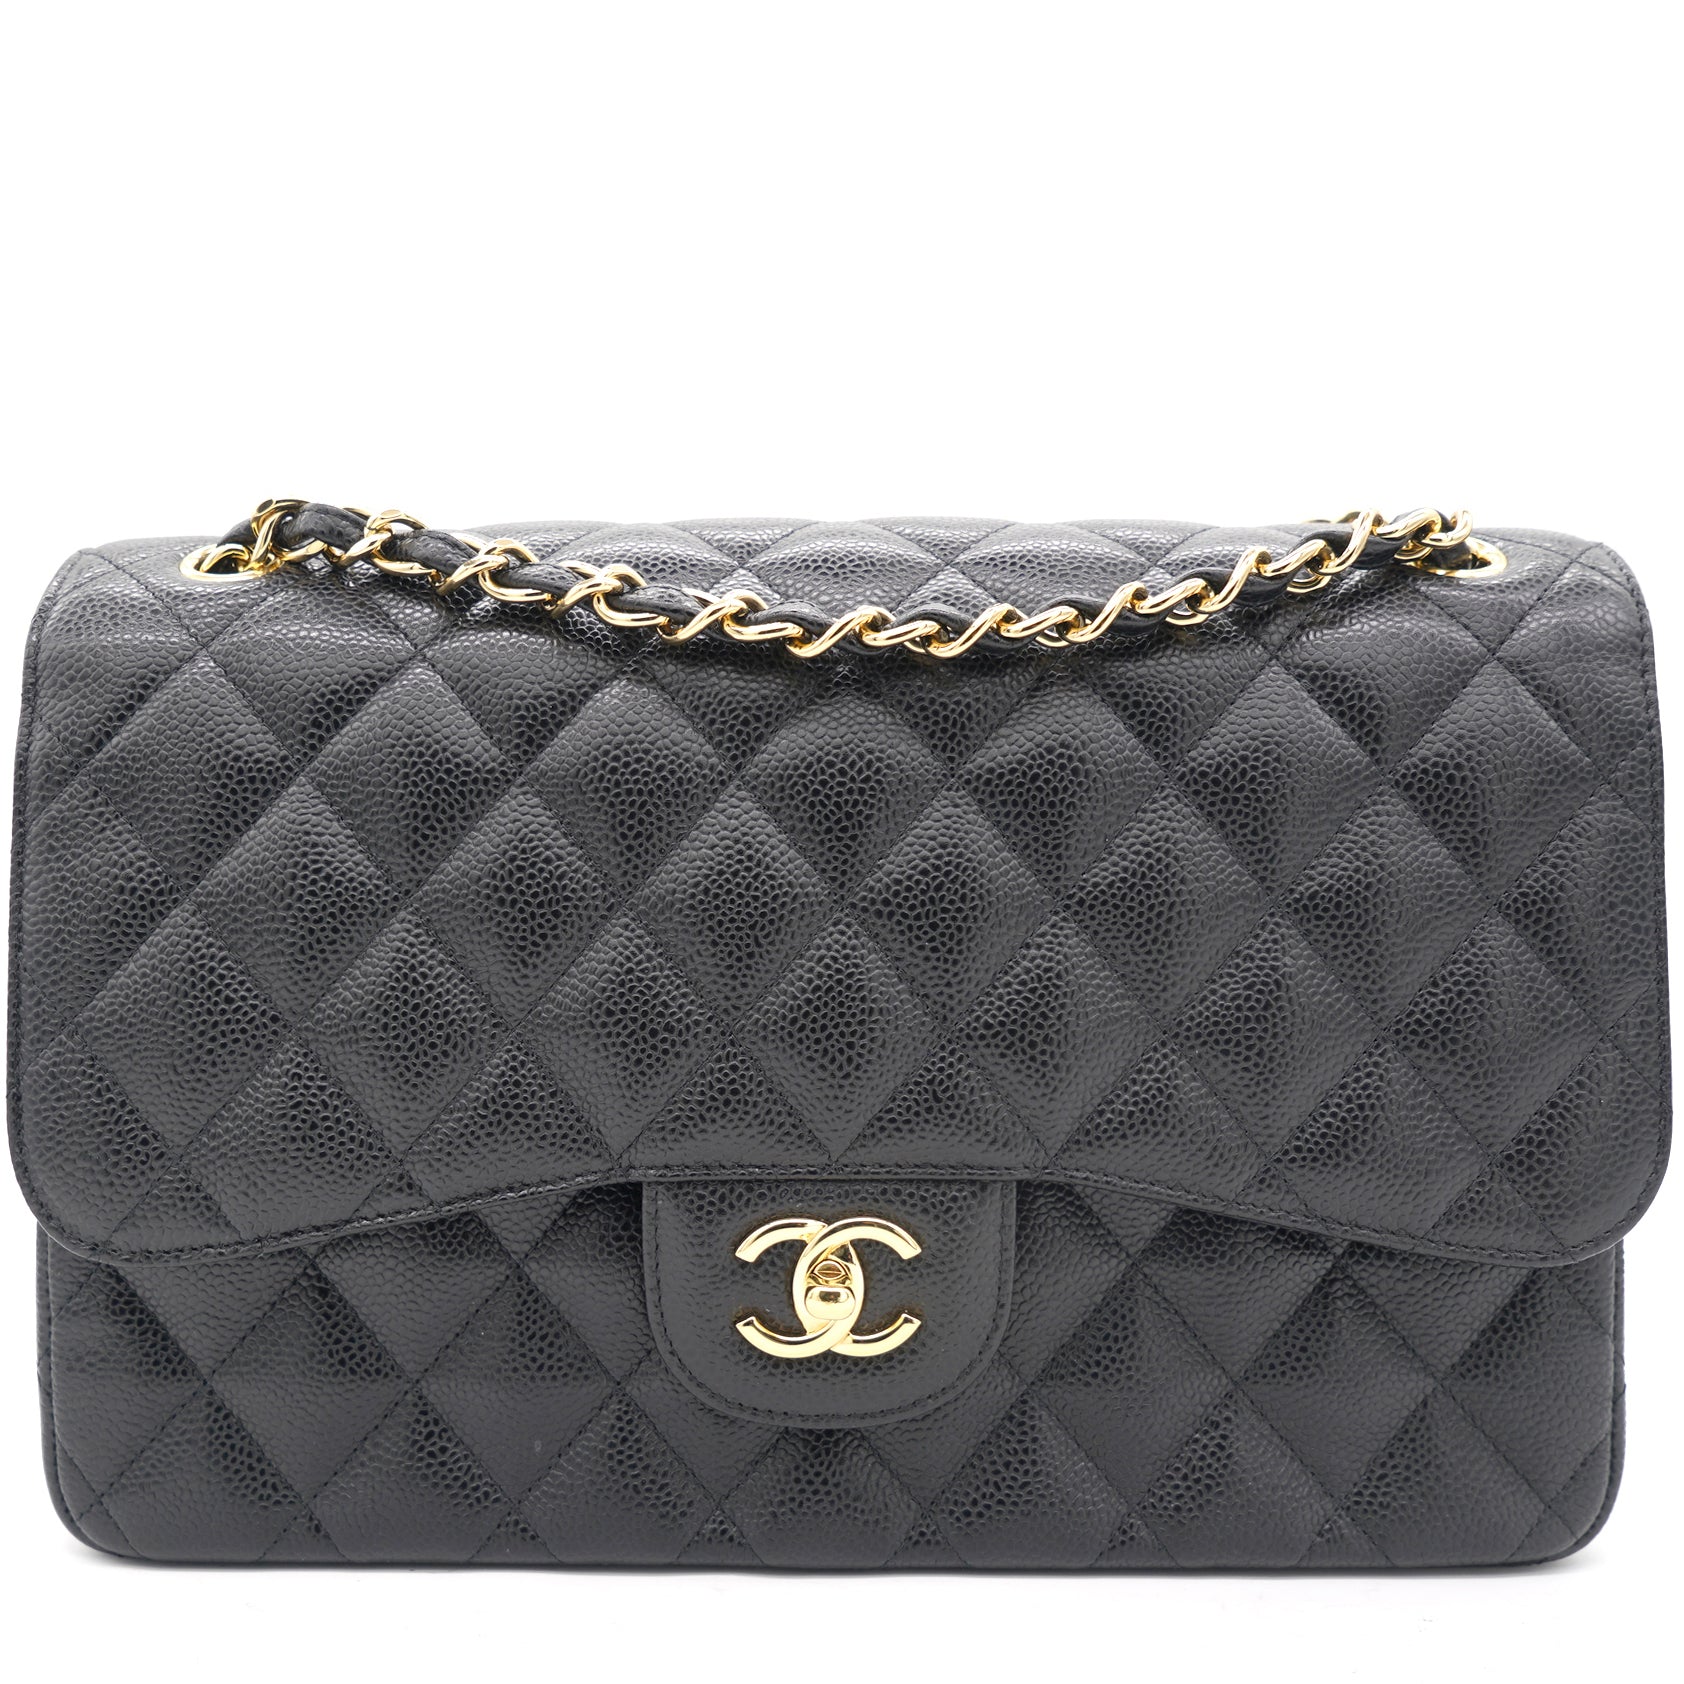 Chanel Classic Jumbo Double Flap Bag in Navy  UFO No More